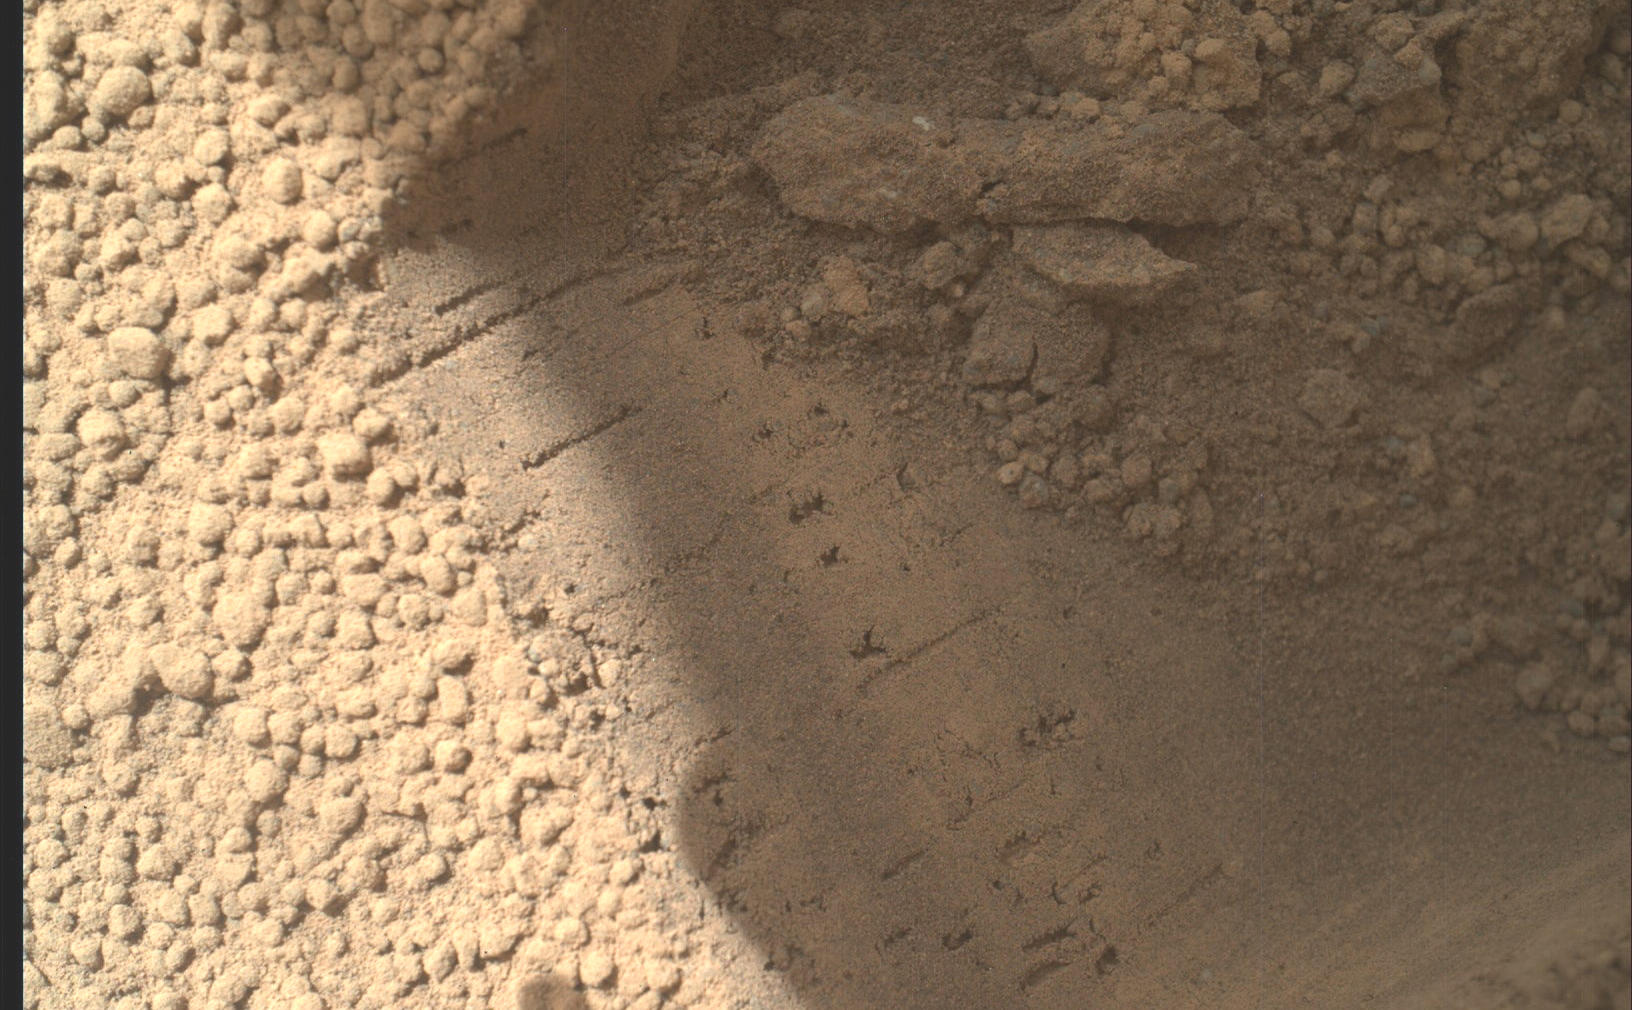 This image contributed to an interpretation by NASA's Mars rover Curiosity science team that some of the bright particles on the ground near the rover are native Martian material.